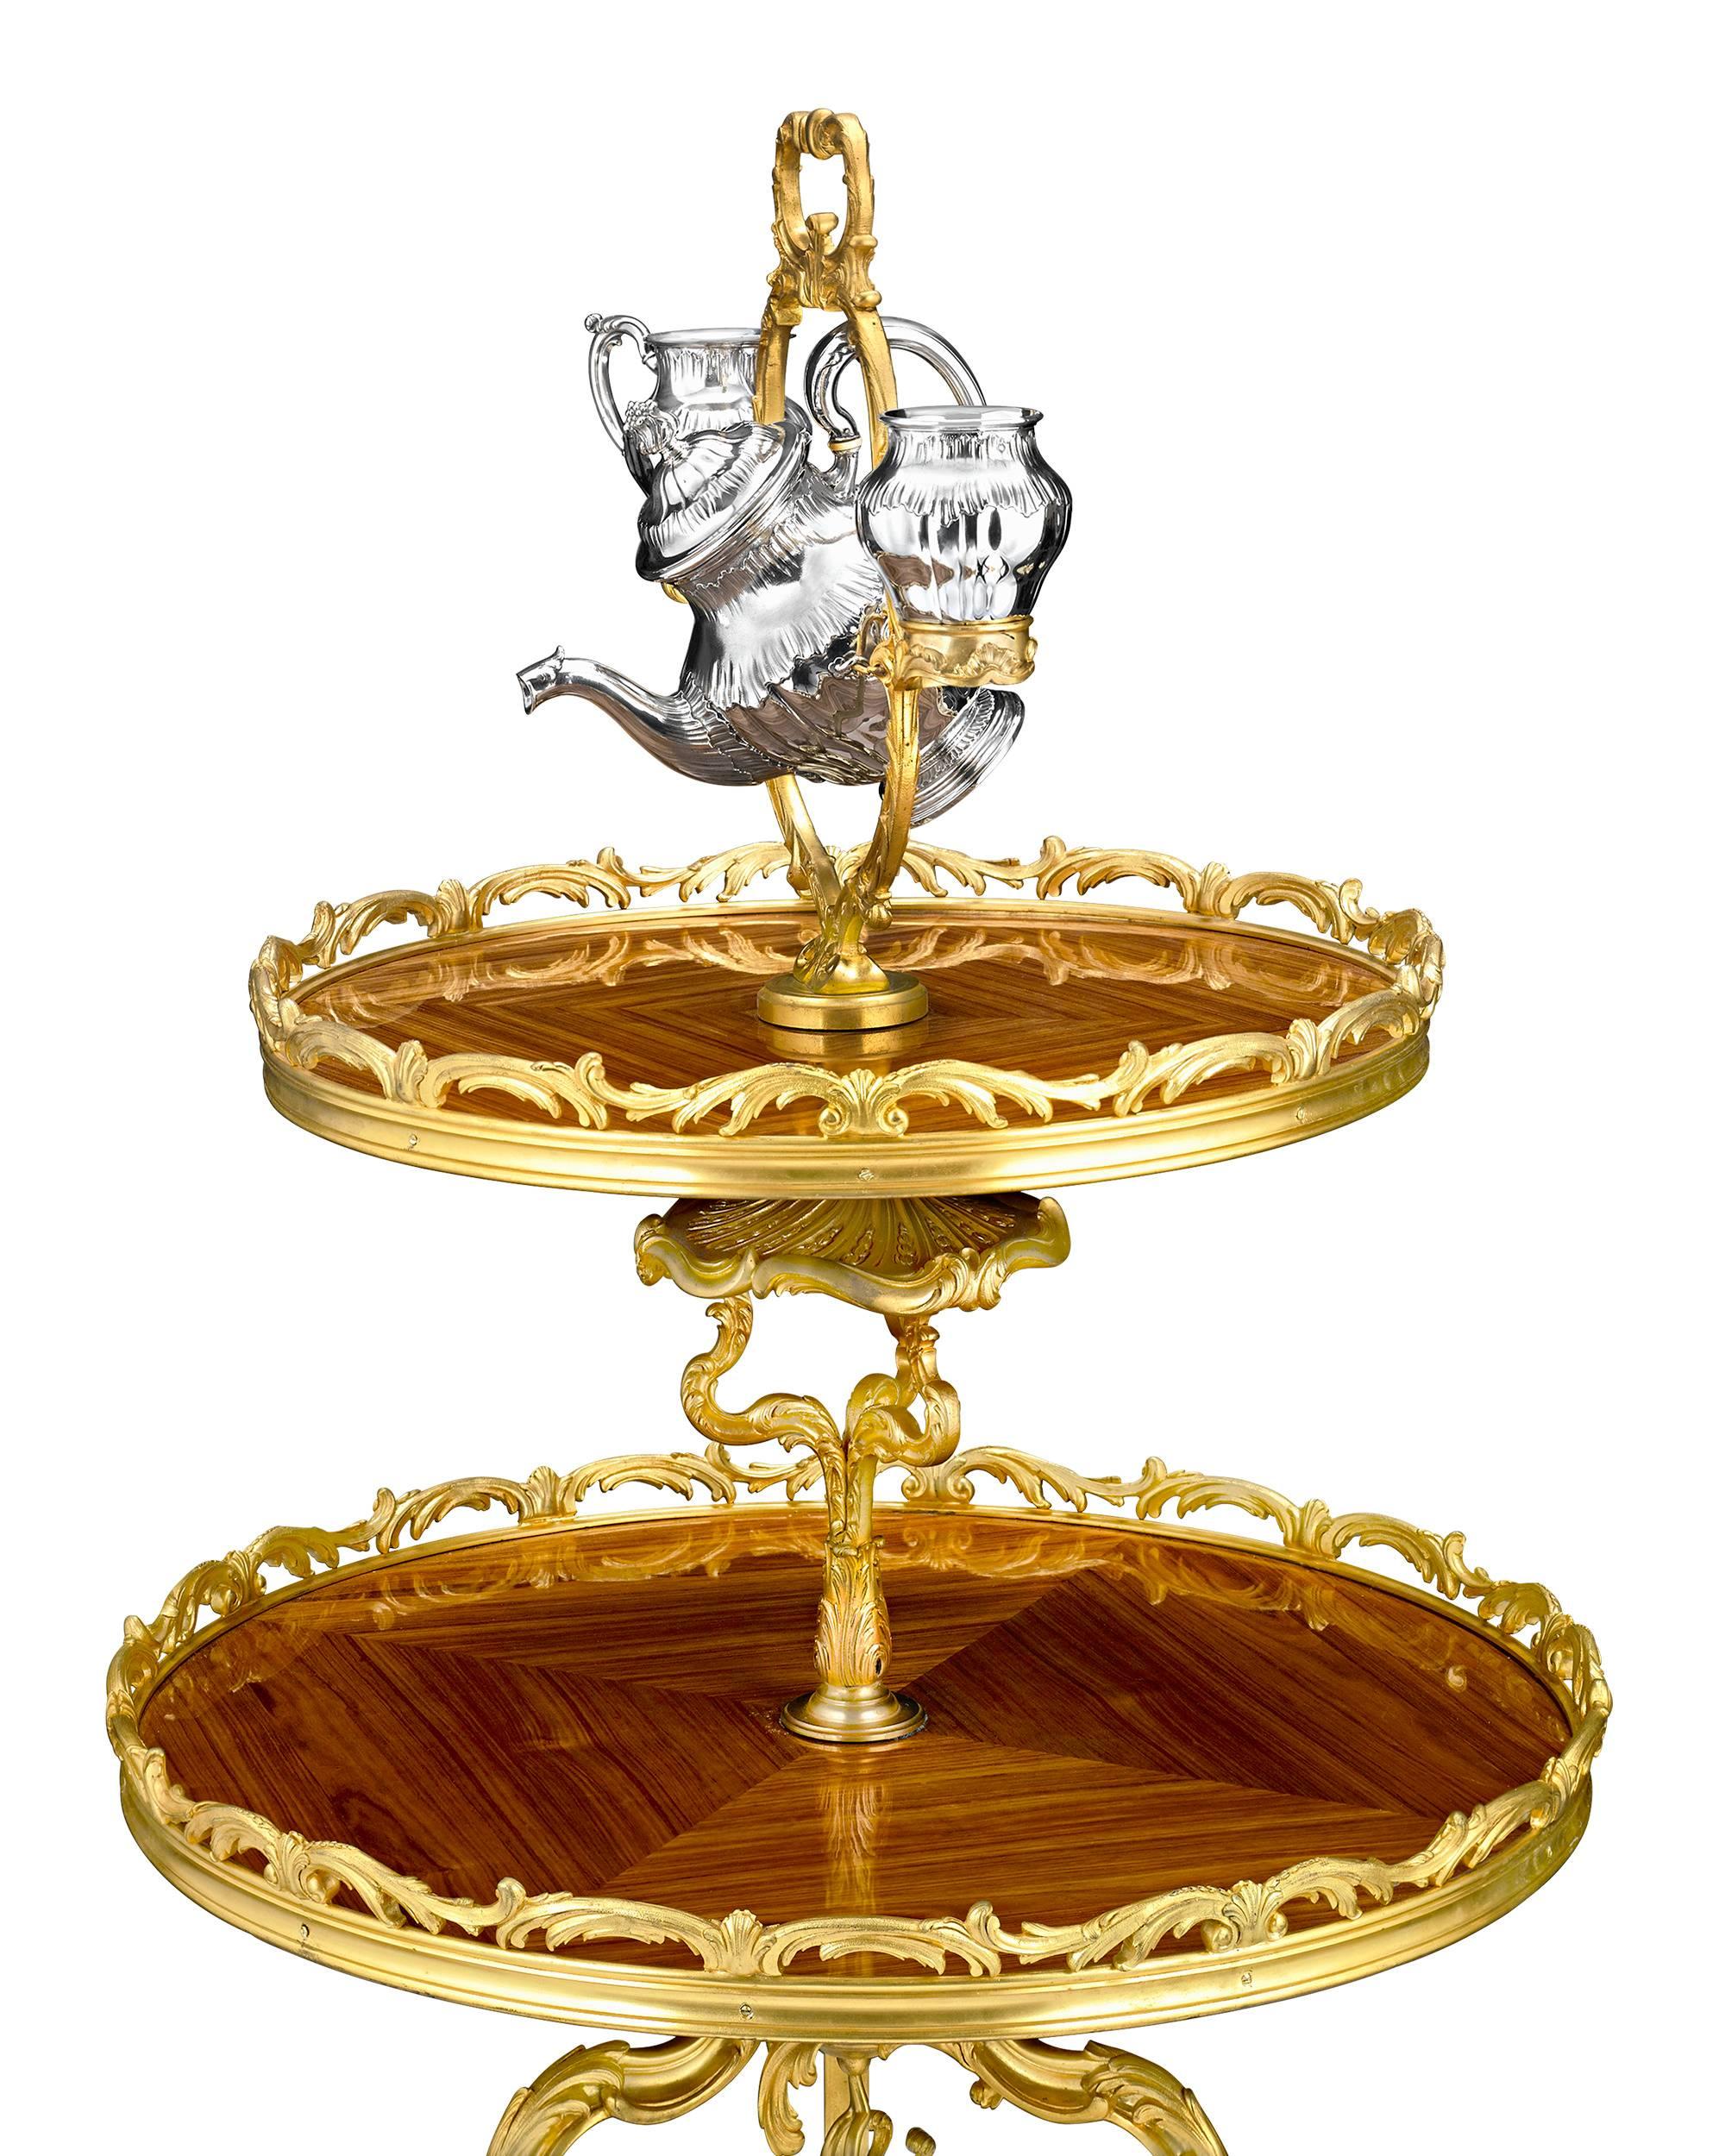 This exquisite tea table by celebrated Parisian silversmith Gustave Keller is an extraordinary example of superior French craftsmanship. The luxurious two-tiered table brings together exceptional metalwork and an ingenious design, with a stunning